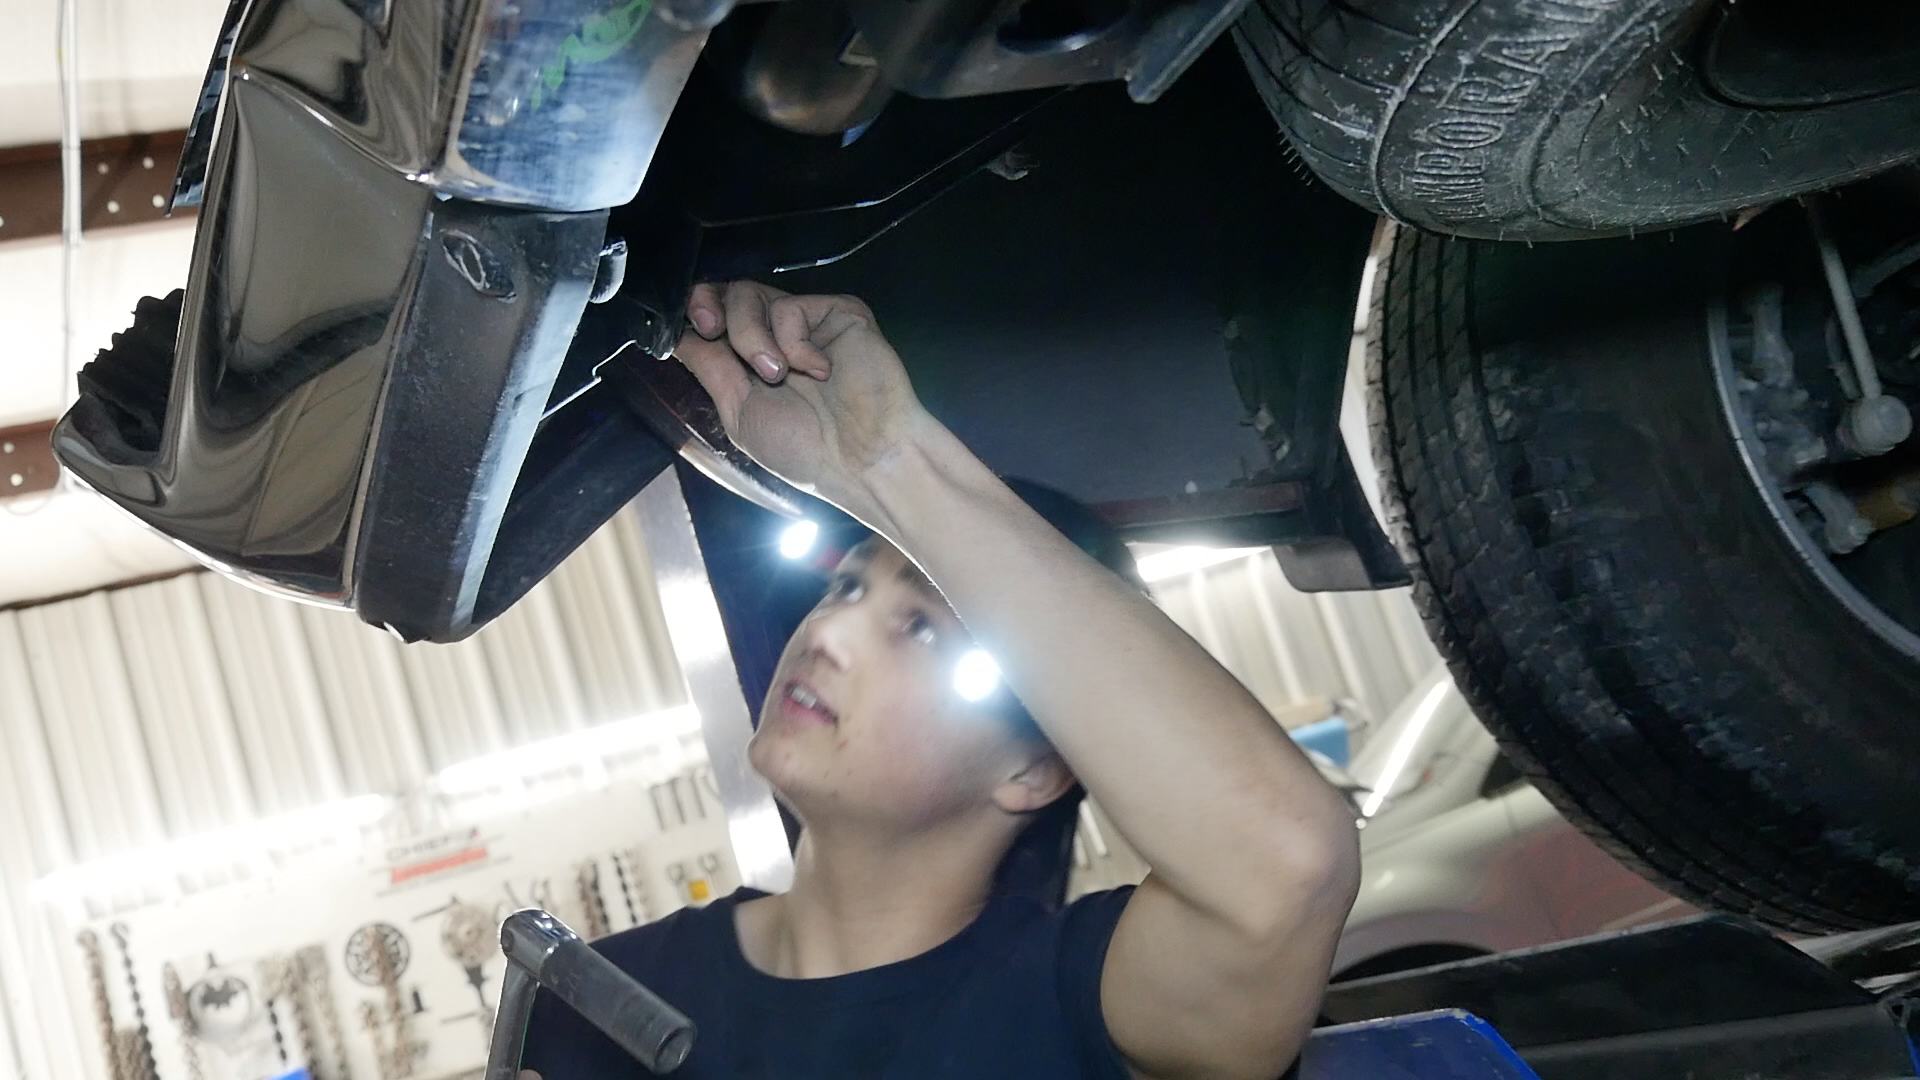 Mechanic inspecting the underside of a vehicle